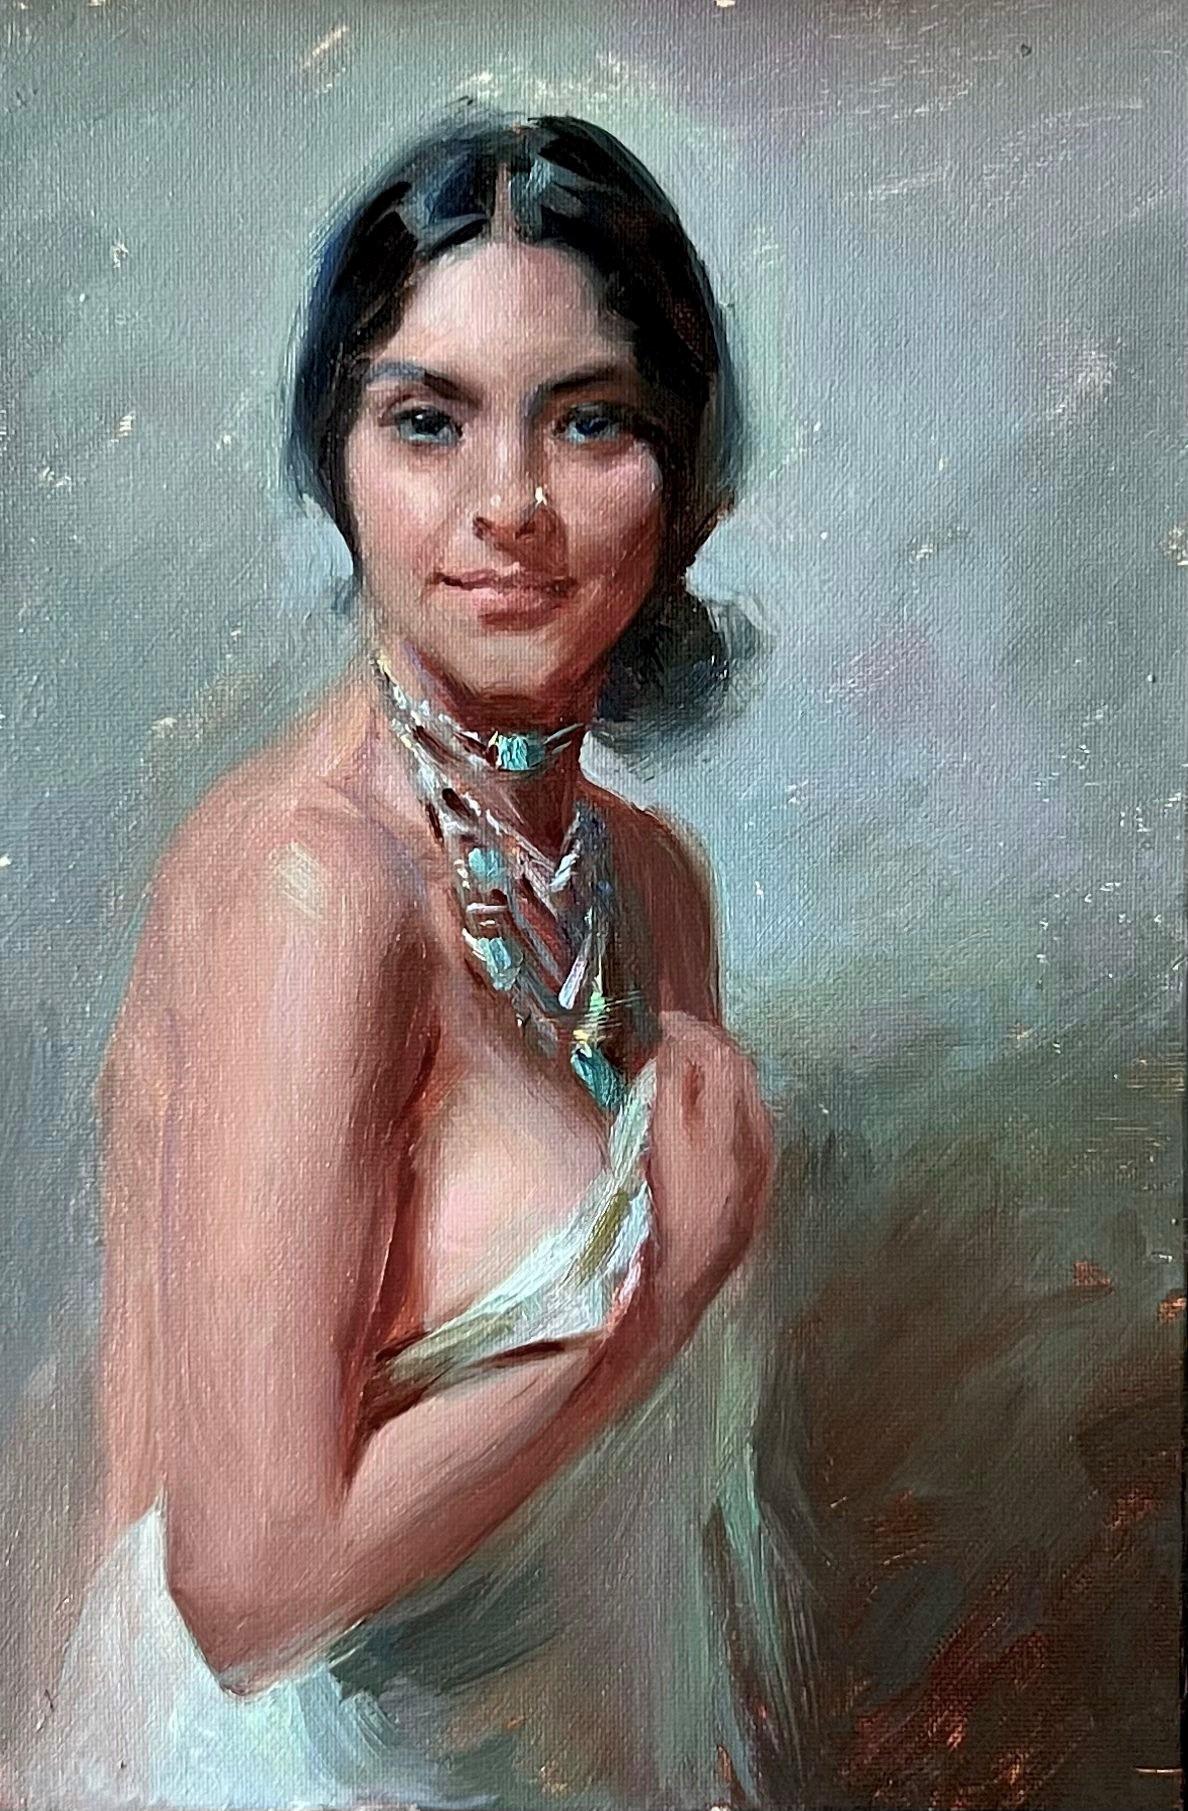 Suchitra Bhosle Figurative Painting - "Native Elegance in Turquoise" Oil Painting